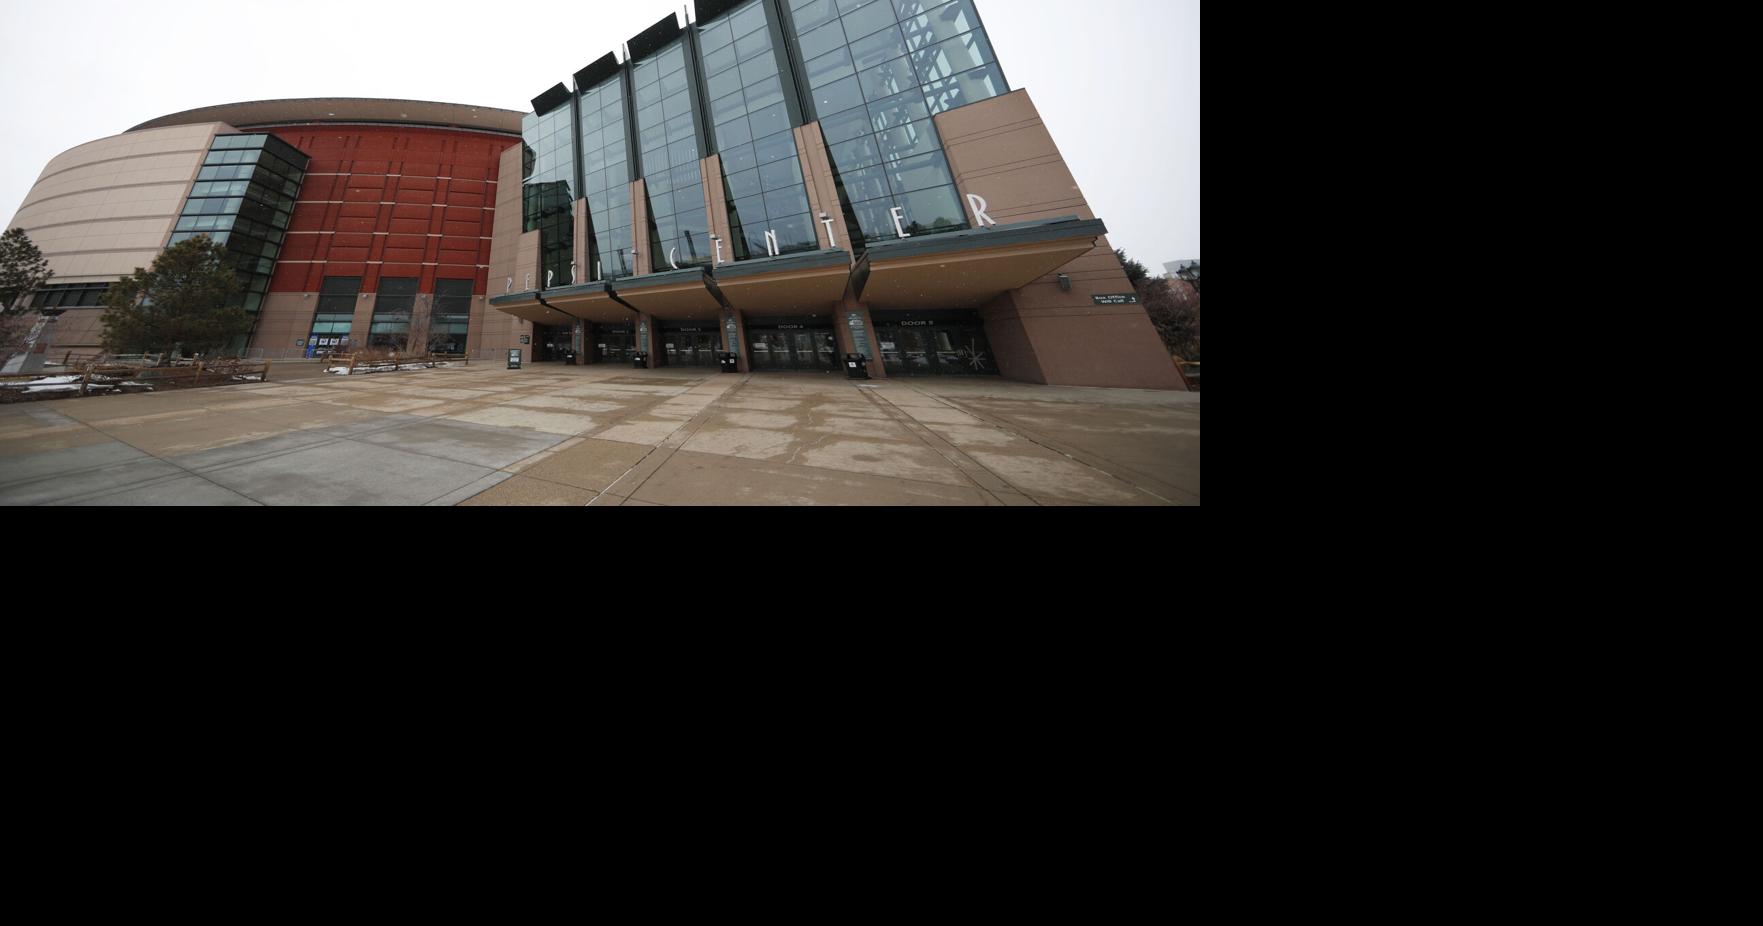 Pepsi Center to be renamed Ball Arena